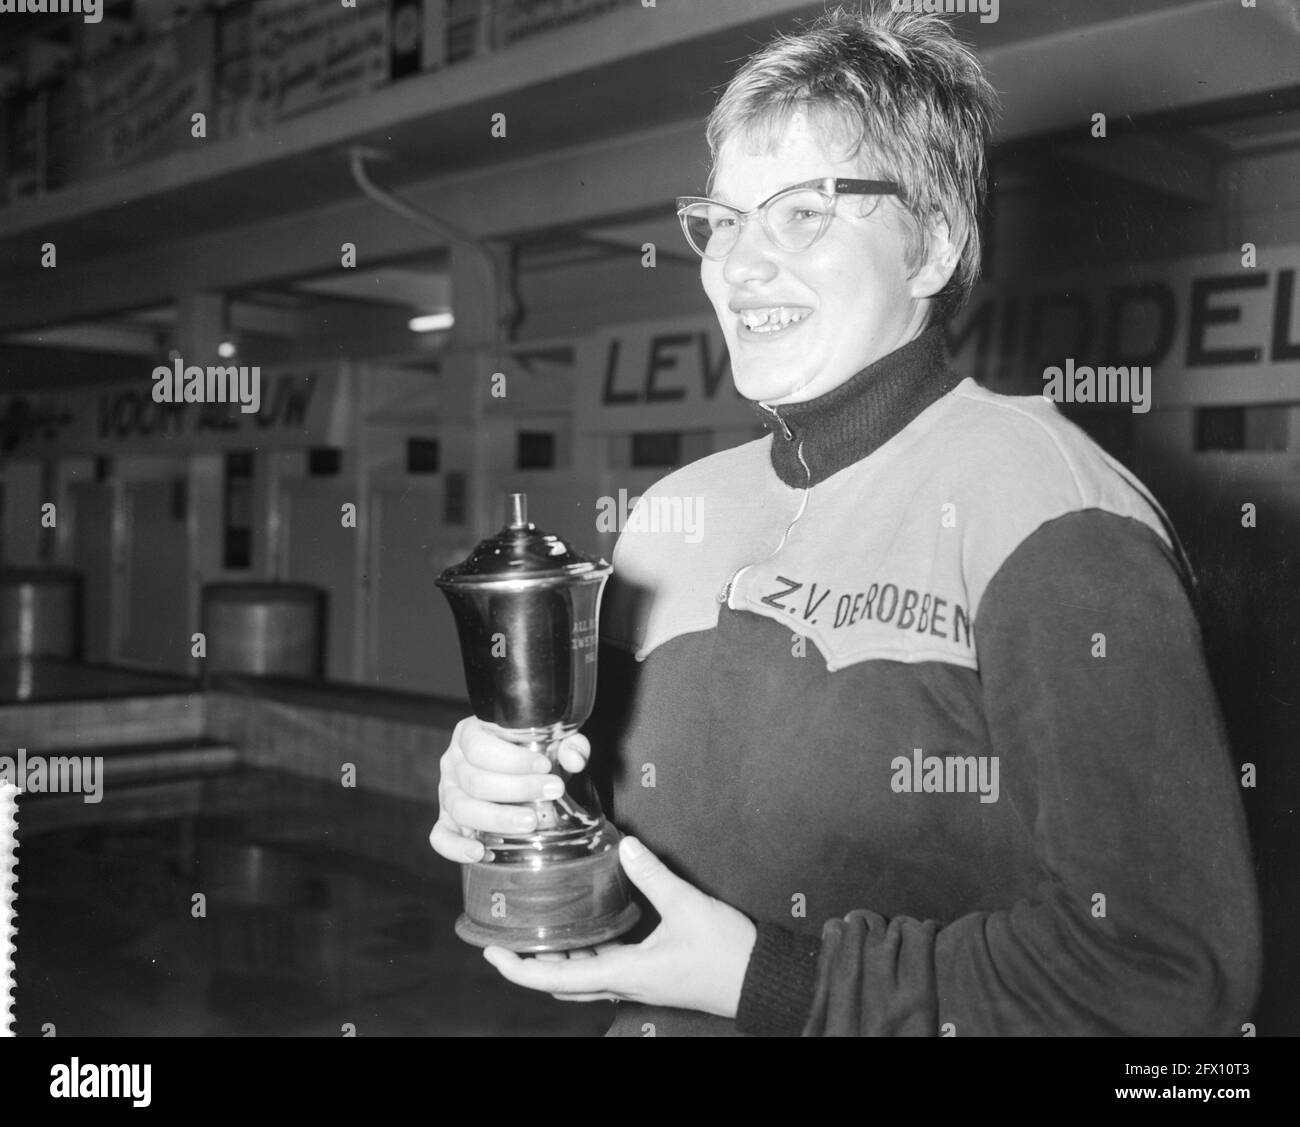 Swimming contests in the Sportfondsenbad Oost for the title All round swimmer, Henny van de Velde, October 15, 1960, SPORTFONDSENBADEN, TITELS, SWIMMING CONDITIONS, The Netherlands, 20th century press agency photo, news to remember, documentary, historic photography 1945-1990, visual stories, human history of the Twentieth Century, capturing moments in time Stock Photo